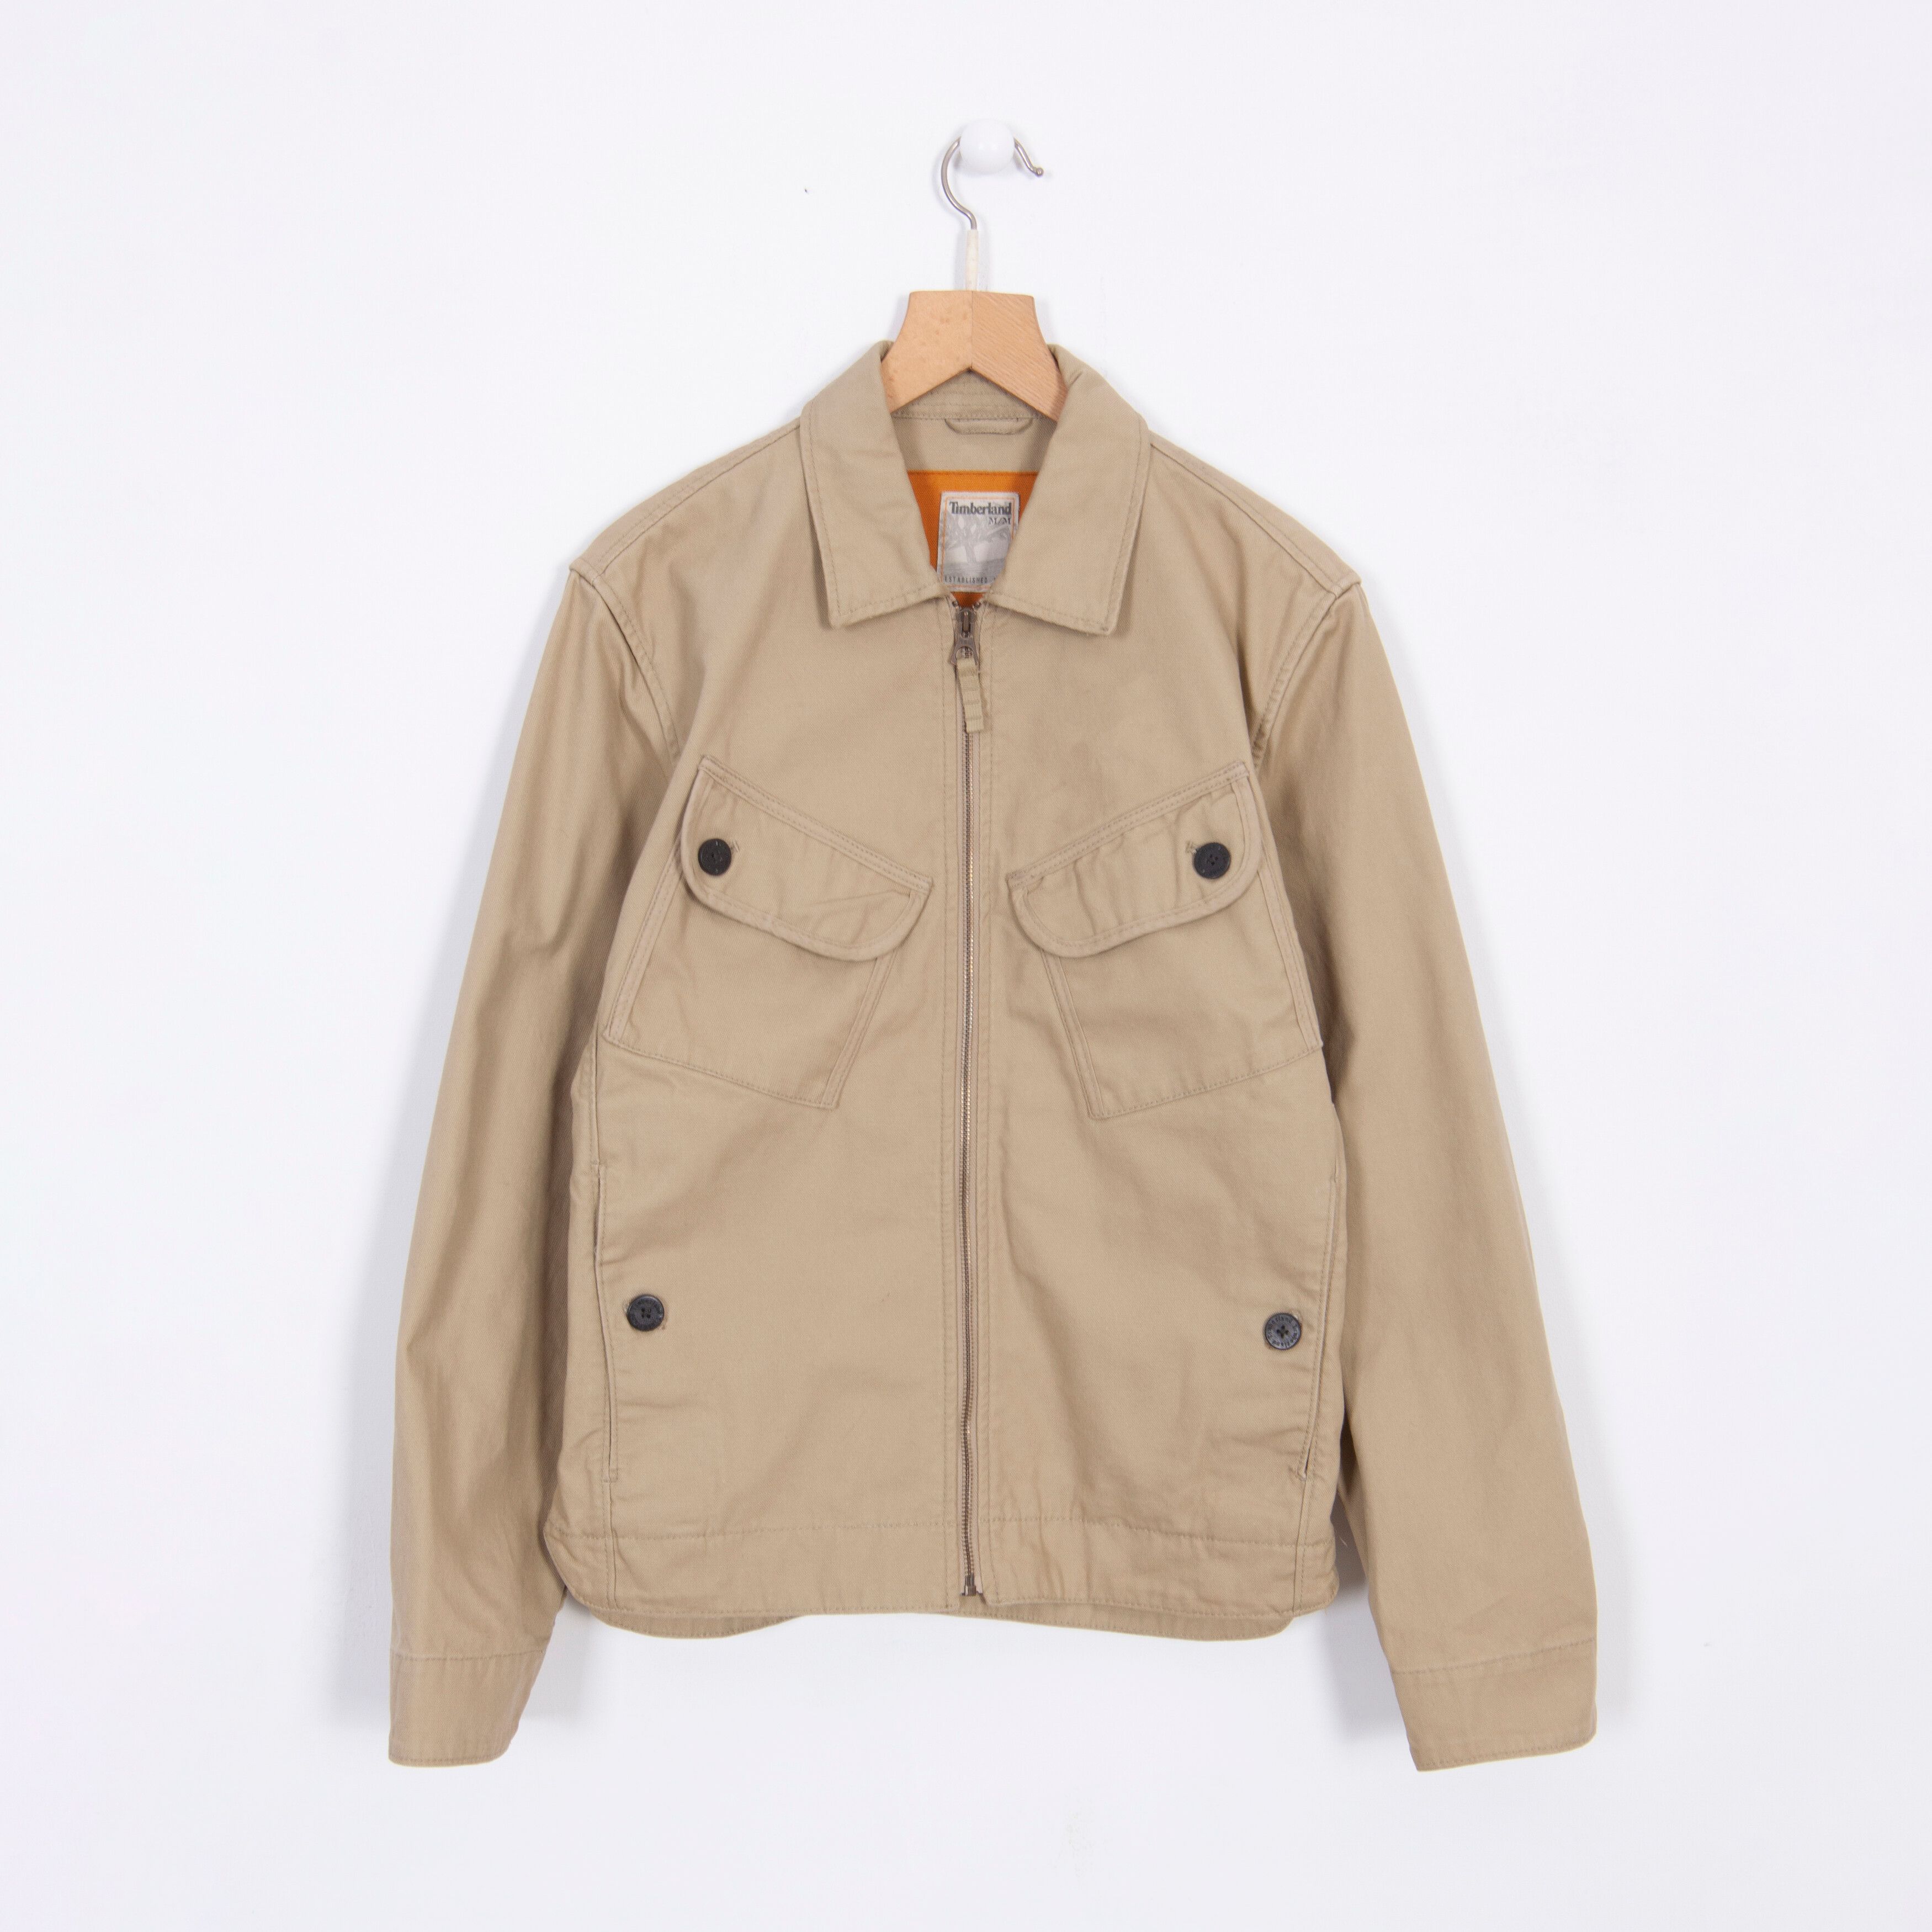 Timberland Timberland Cotton Beige Military Jacket Bomber Style Size US M / EU 48-50 / 2 - 1 Preview